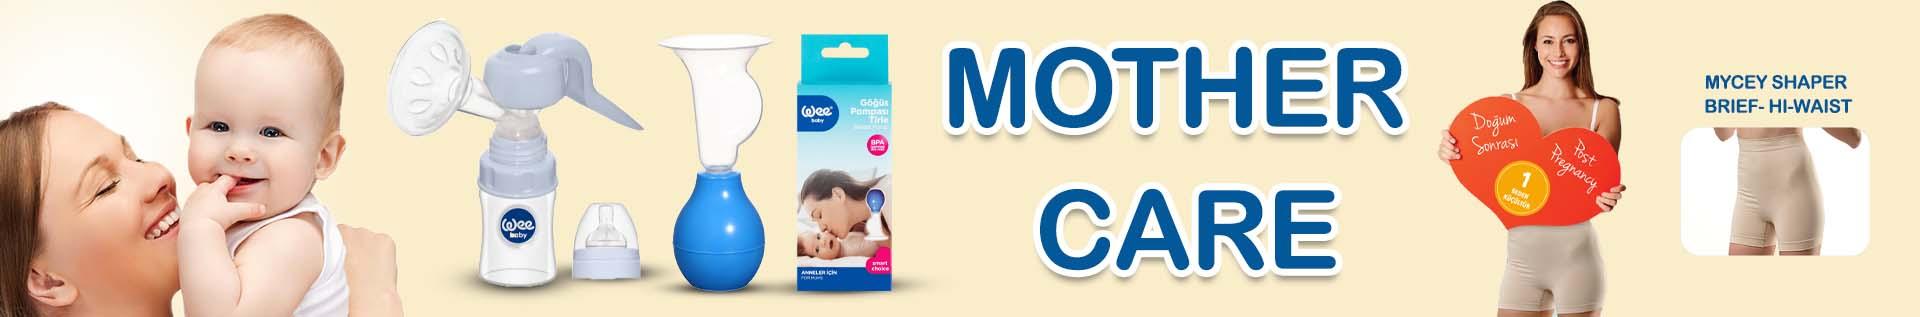 1695874859195_mother_care_products.jpg